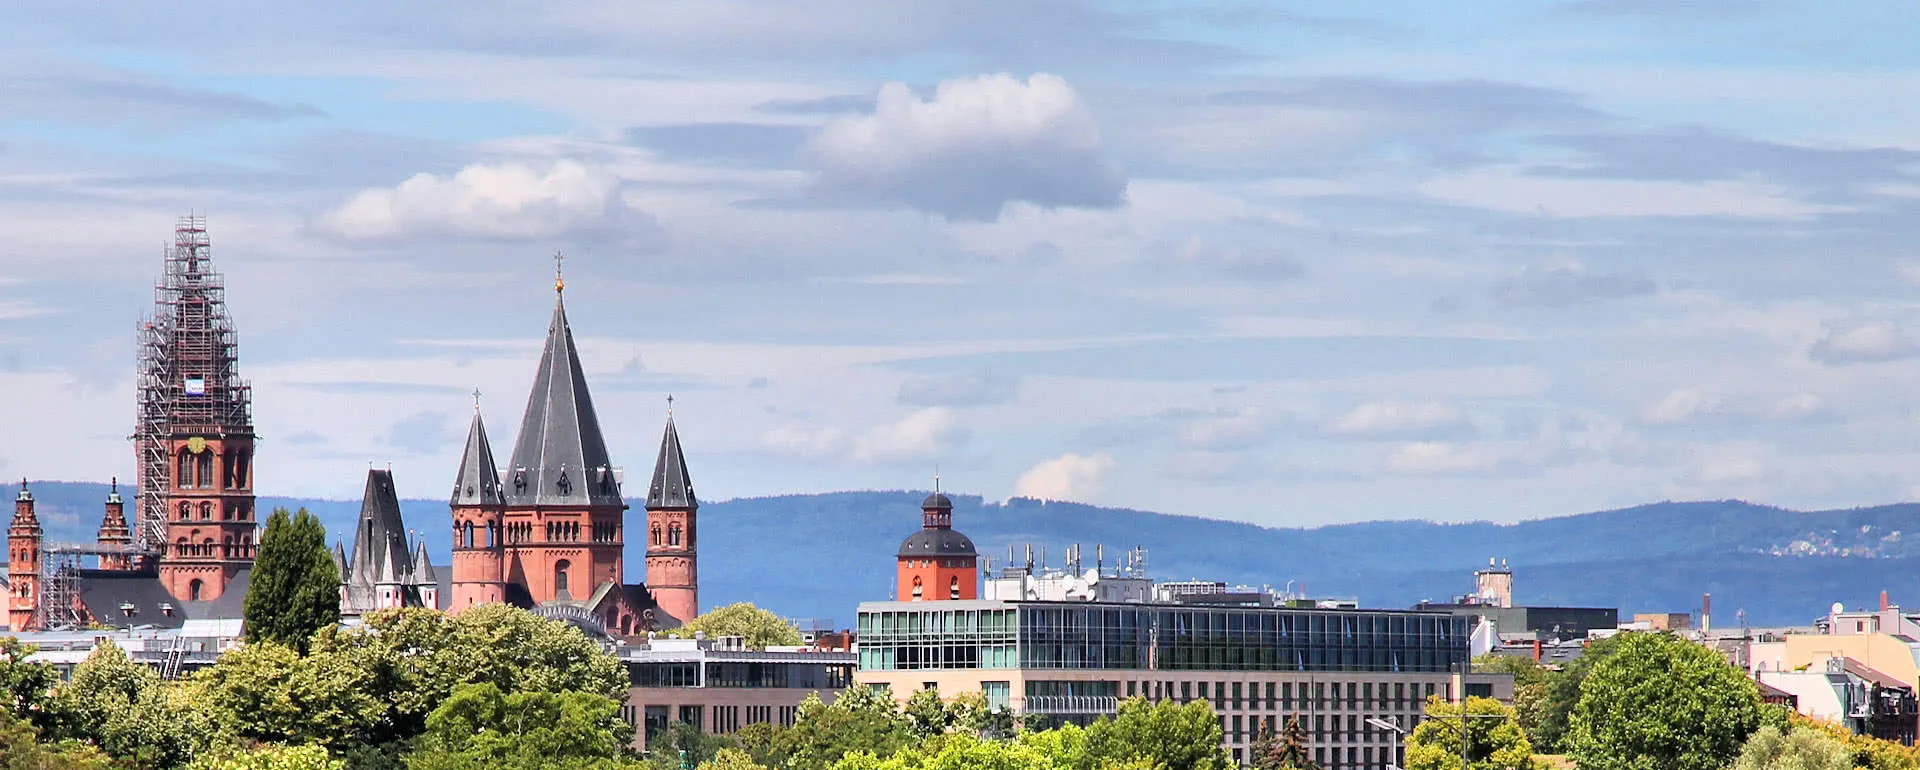 Mainz - the destination with youth hostels